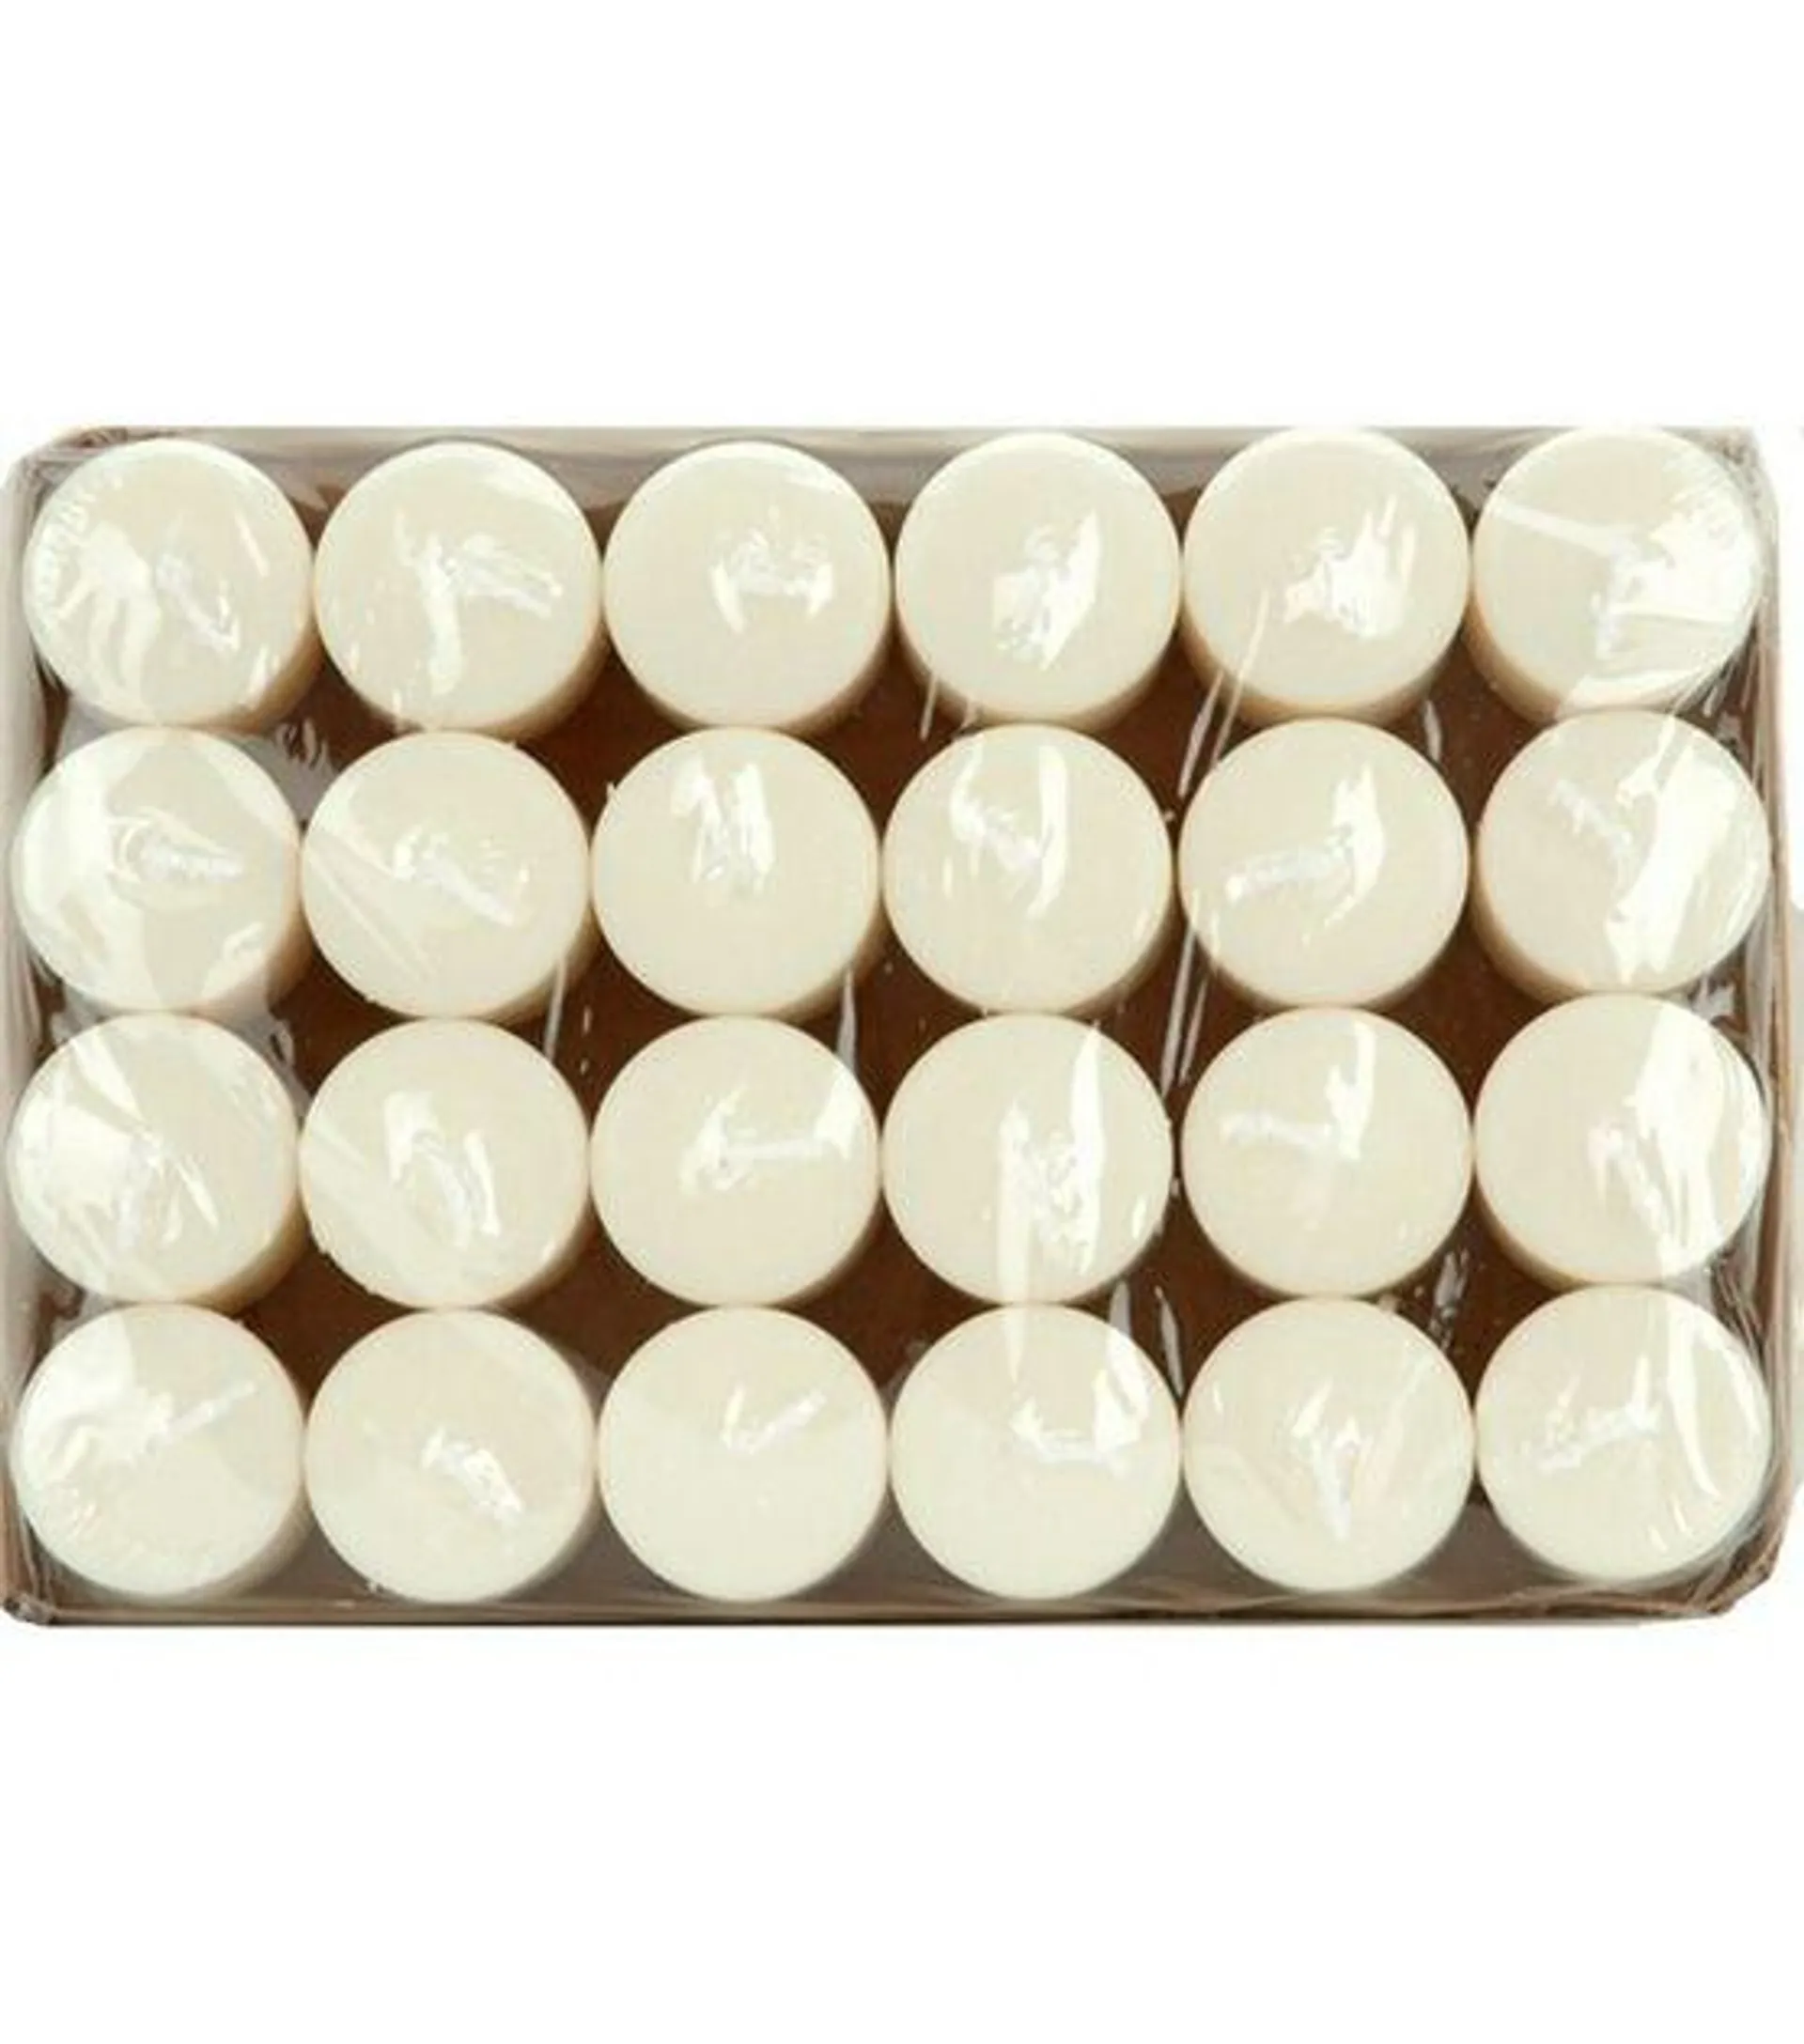 Hudson 43 Candle & Light Collection 24pk Votive Candles White